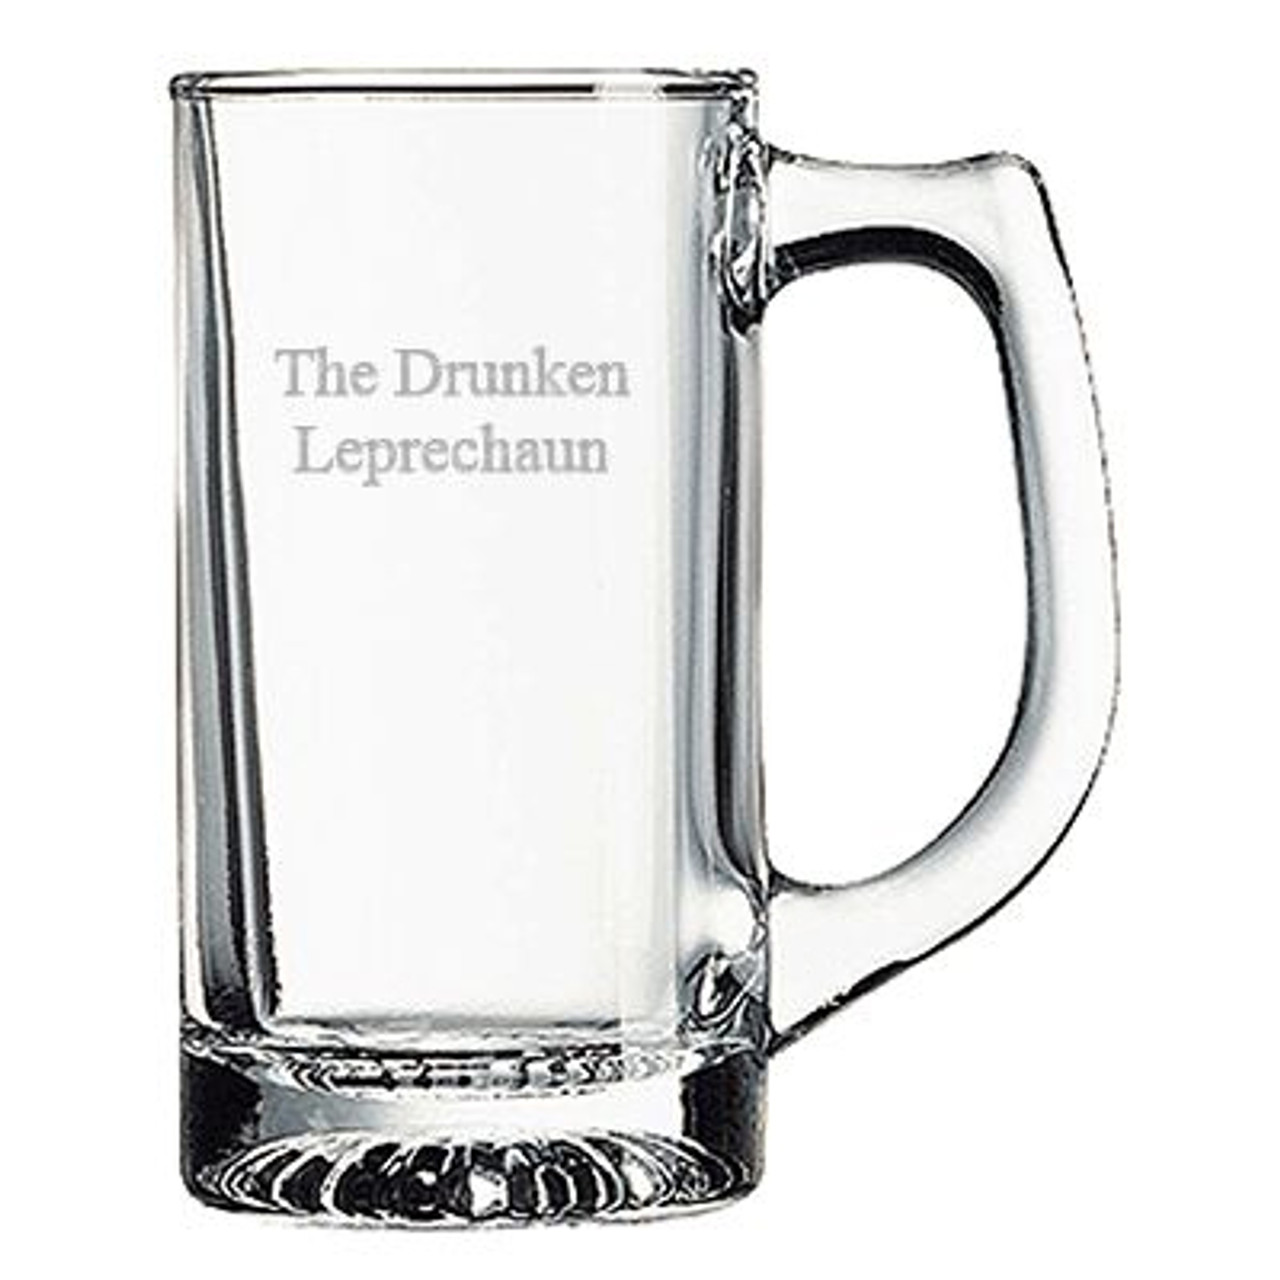 https://cdn11.bigcommerce.com/s-cznxq08r7/images/stencil/1280x1280/products/1694/1816/0013_beer-mugs-set-of-4_01__65421.1590765337.jpg?c=1